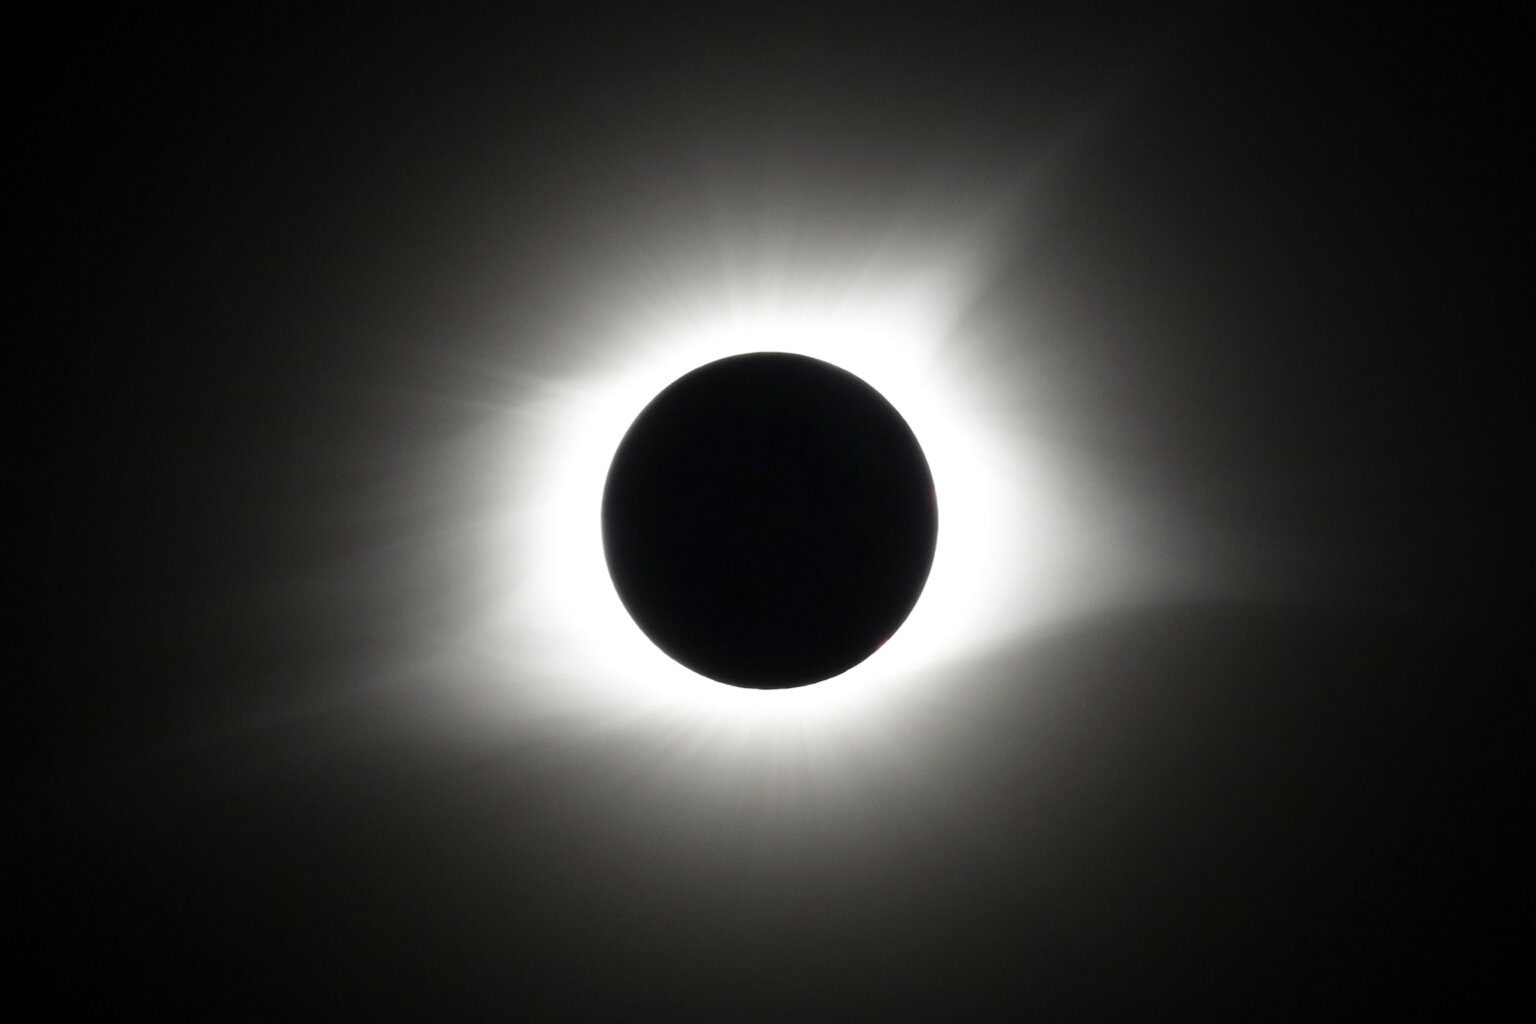 Princess Cruises offering guests the opportunity to view a total solar eclipse in 2024